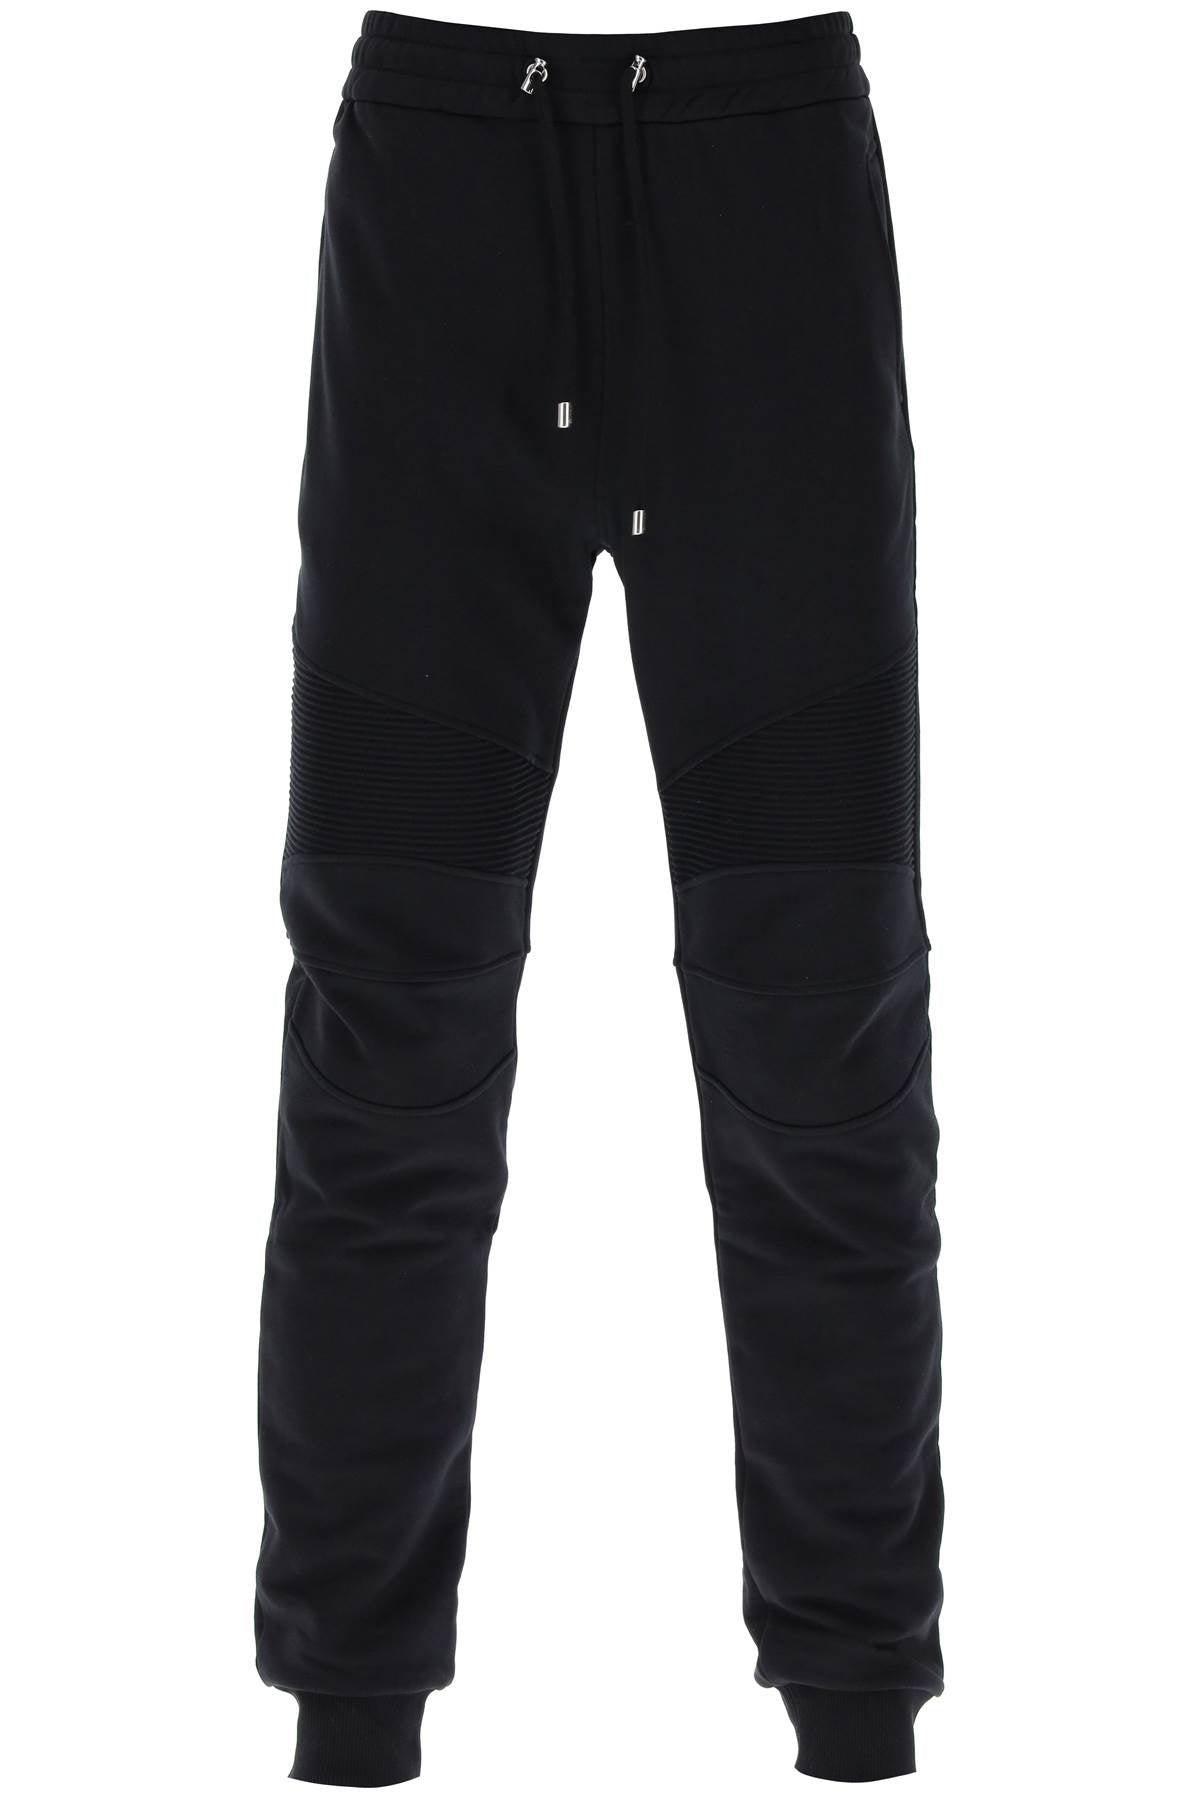 Balmain joggers with topstitched inserts CH1OB000BB04 NOIR BLANC